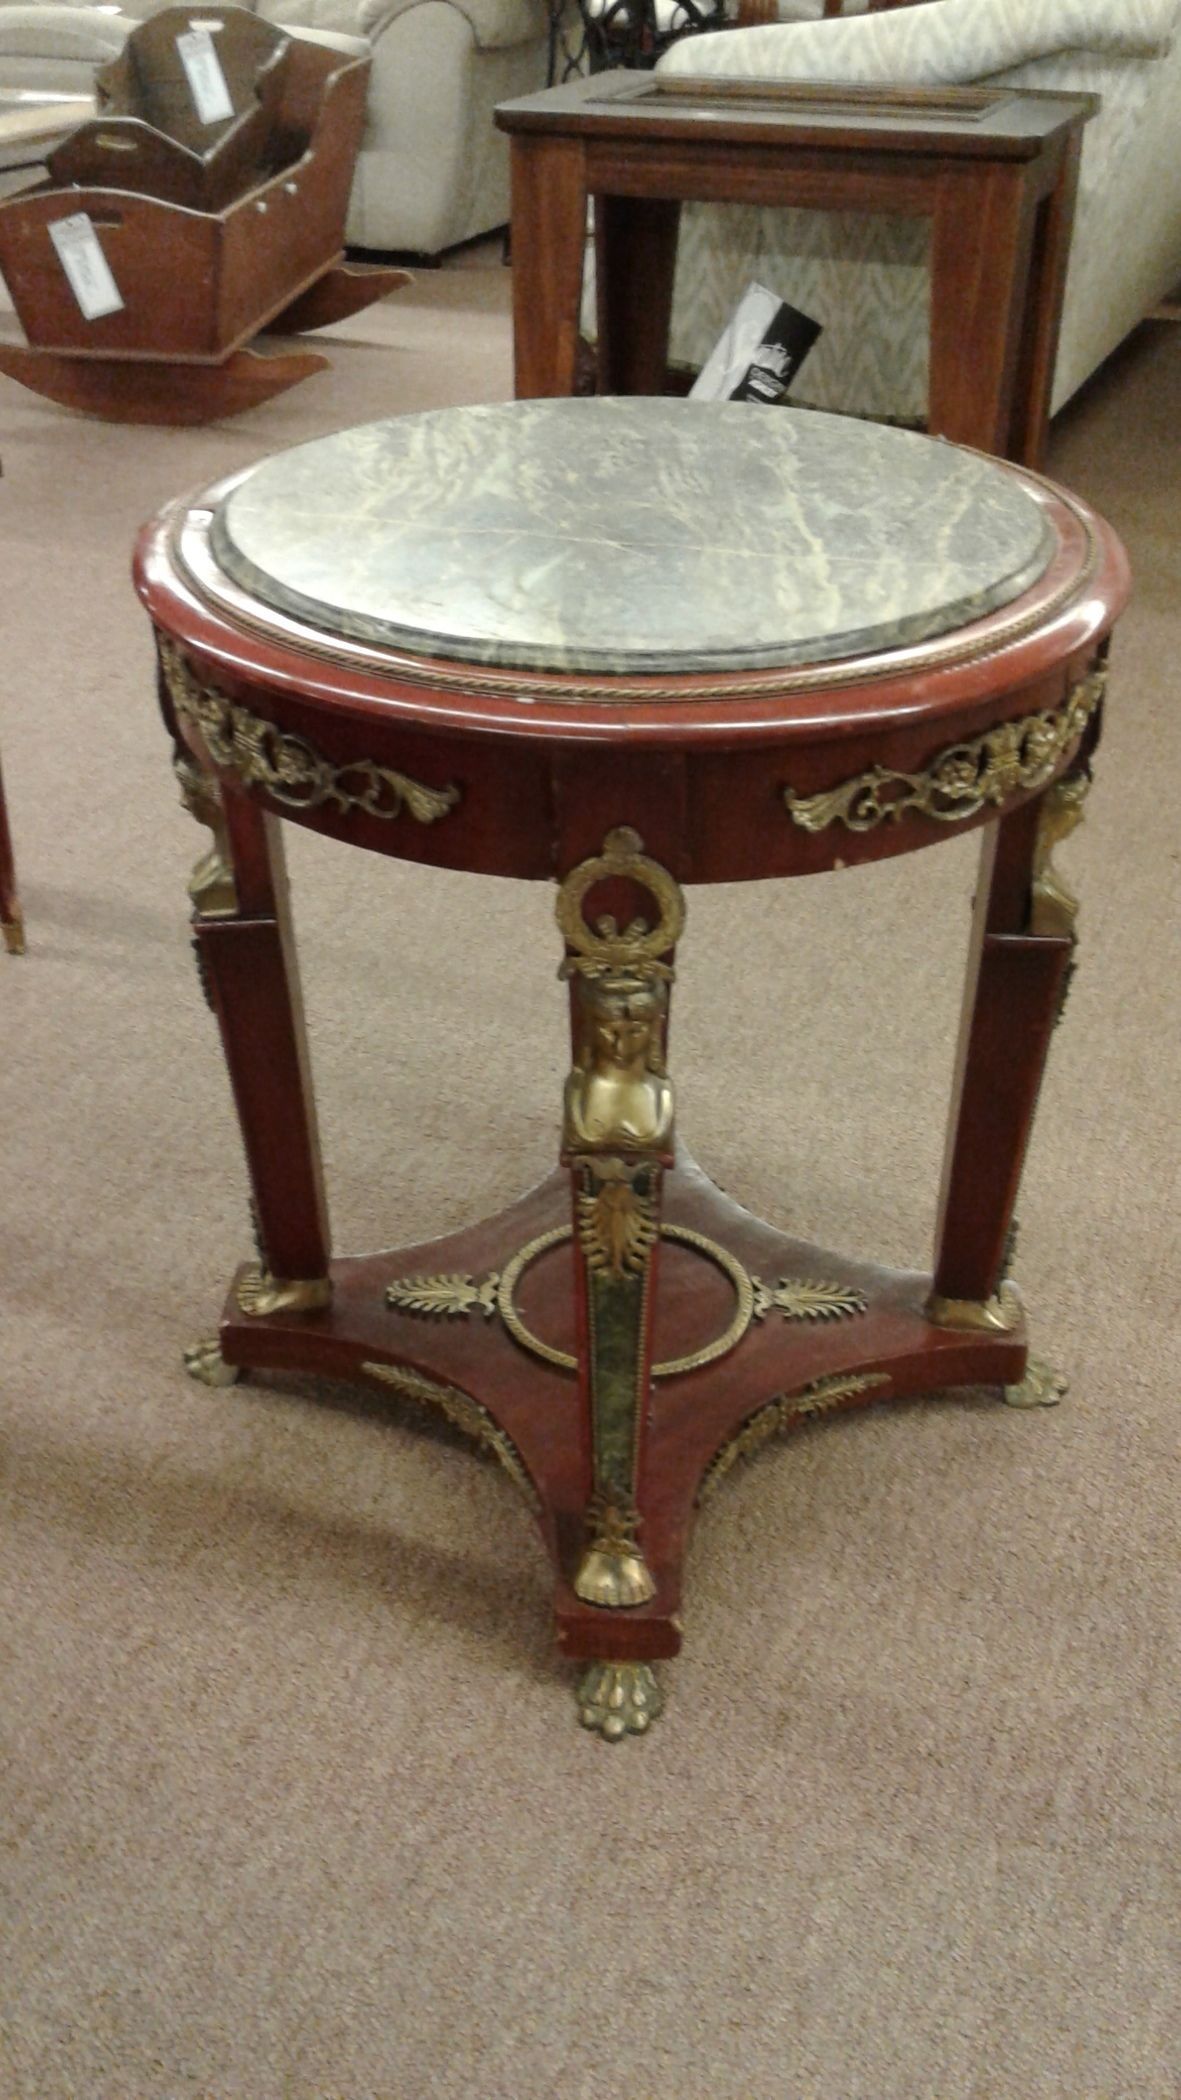 Round Marble Top End Table | Delmarva Furniture Consignment Within Oval Corn Straw Rope Console Tables (View 4 of 20)